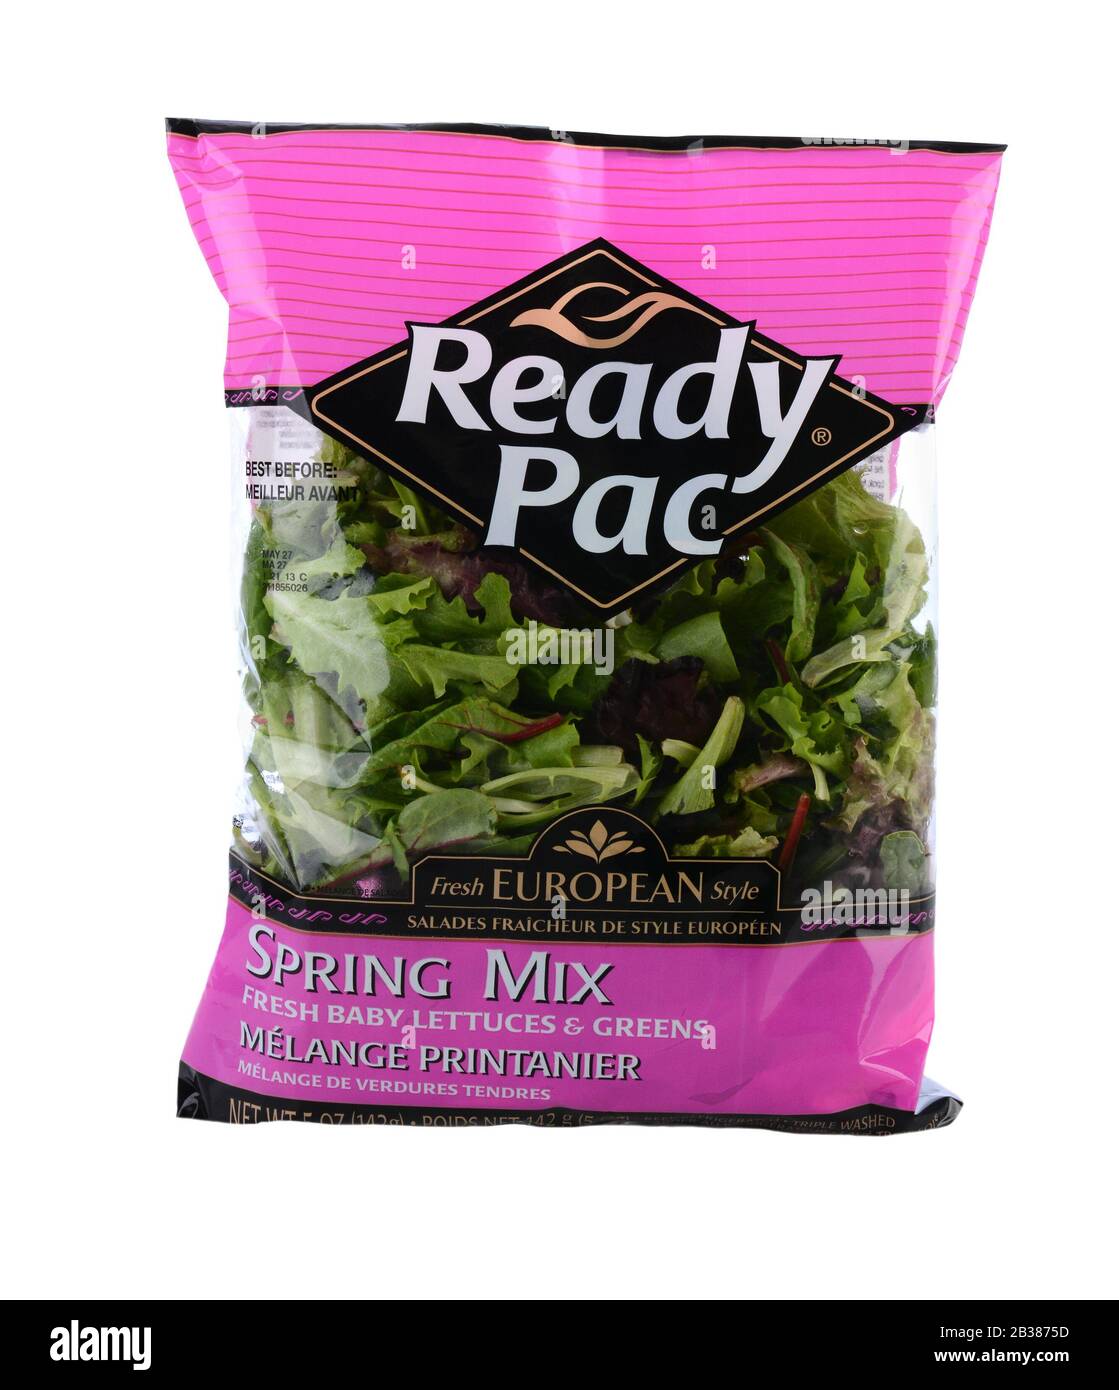 https://c8.alamy.com/comp/2B3875D/irvine-ca-may-20-2014-a-5-ounce-package-of-ready-pac-spring-mix-salad-greens-ready-pac-is-a-california-based-packager-of-pre-cut-and-salad-green-2B3875D.jpg